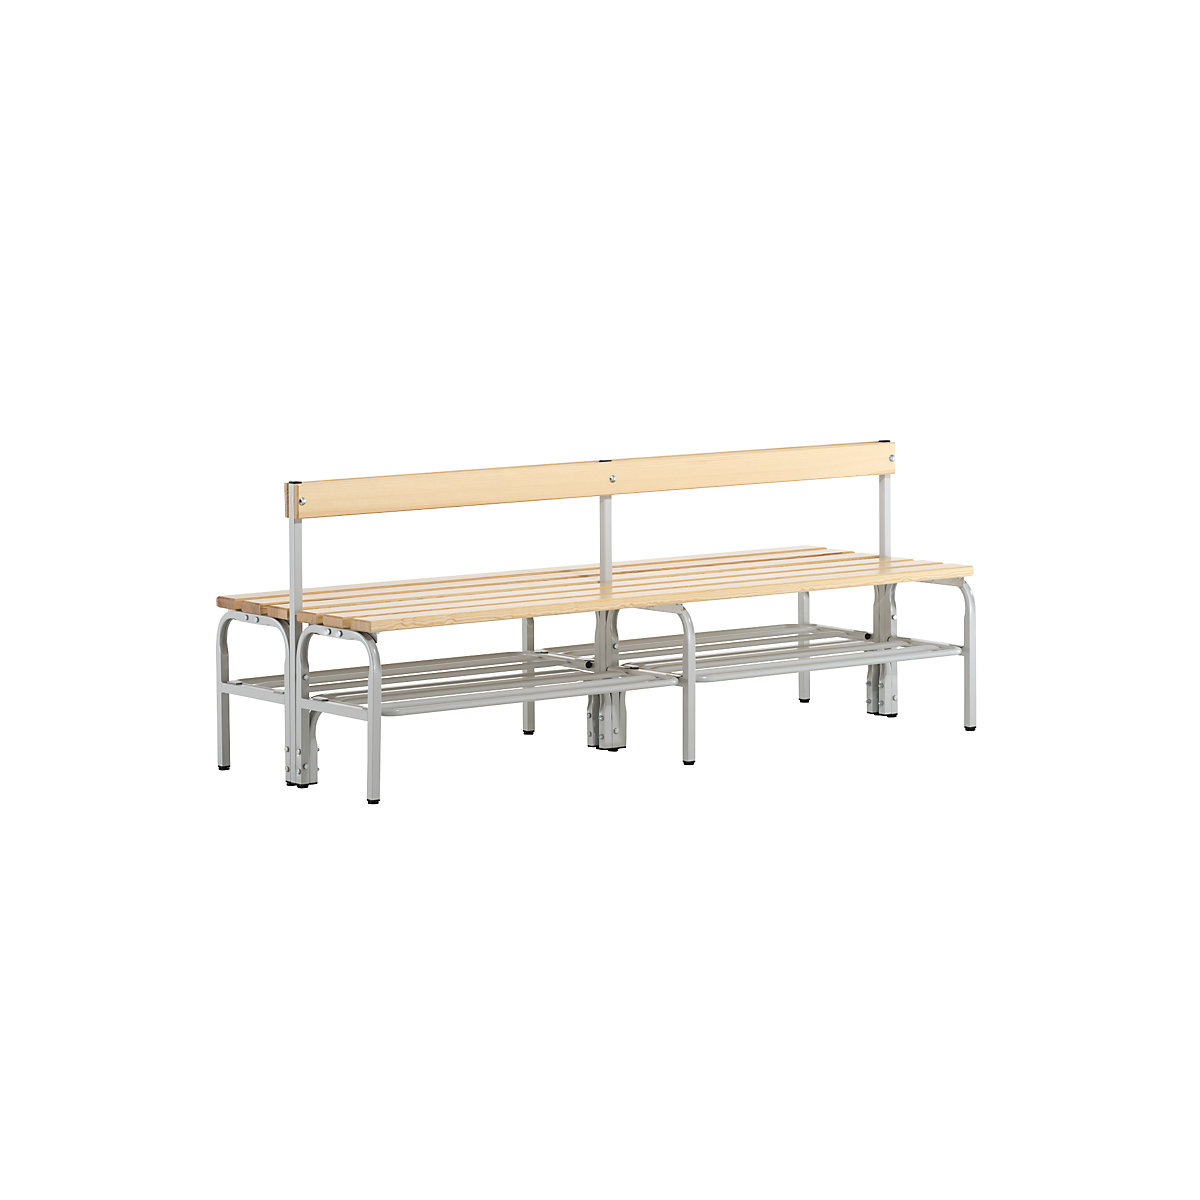 Half height cloakroom bench with back rest, double sided – Sypro, pine wood slats, length 1500 mm, light grey, shoe rack-2